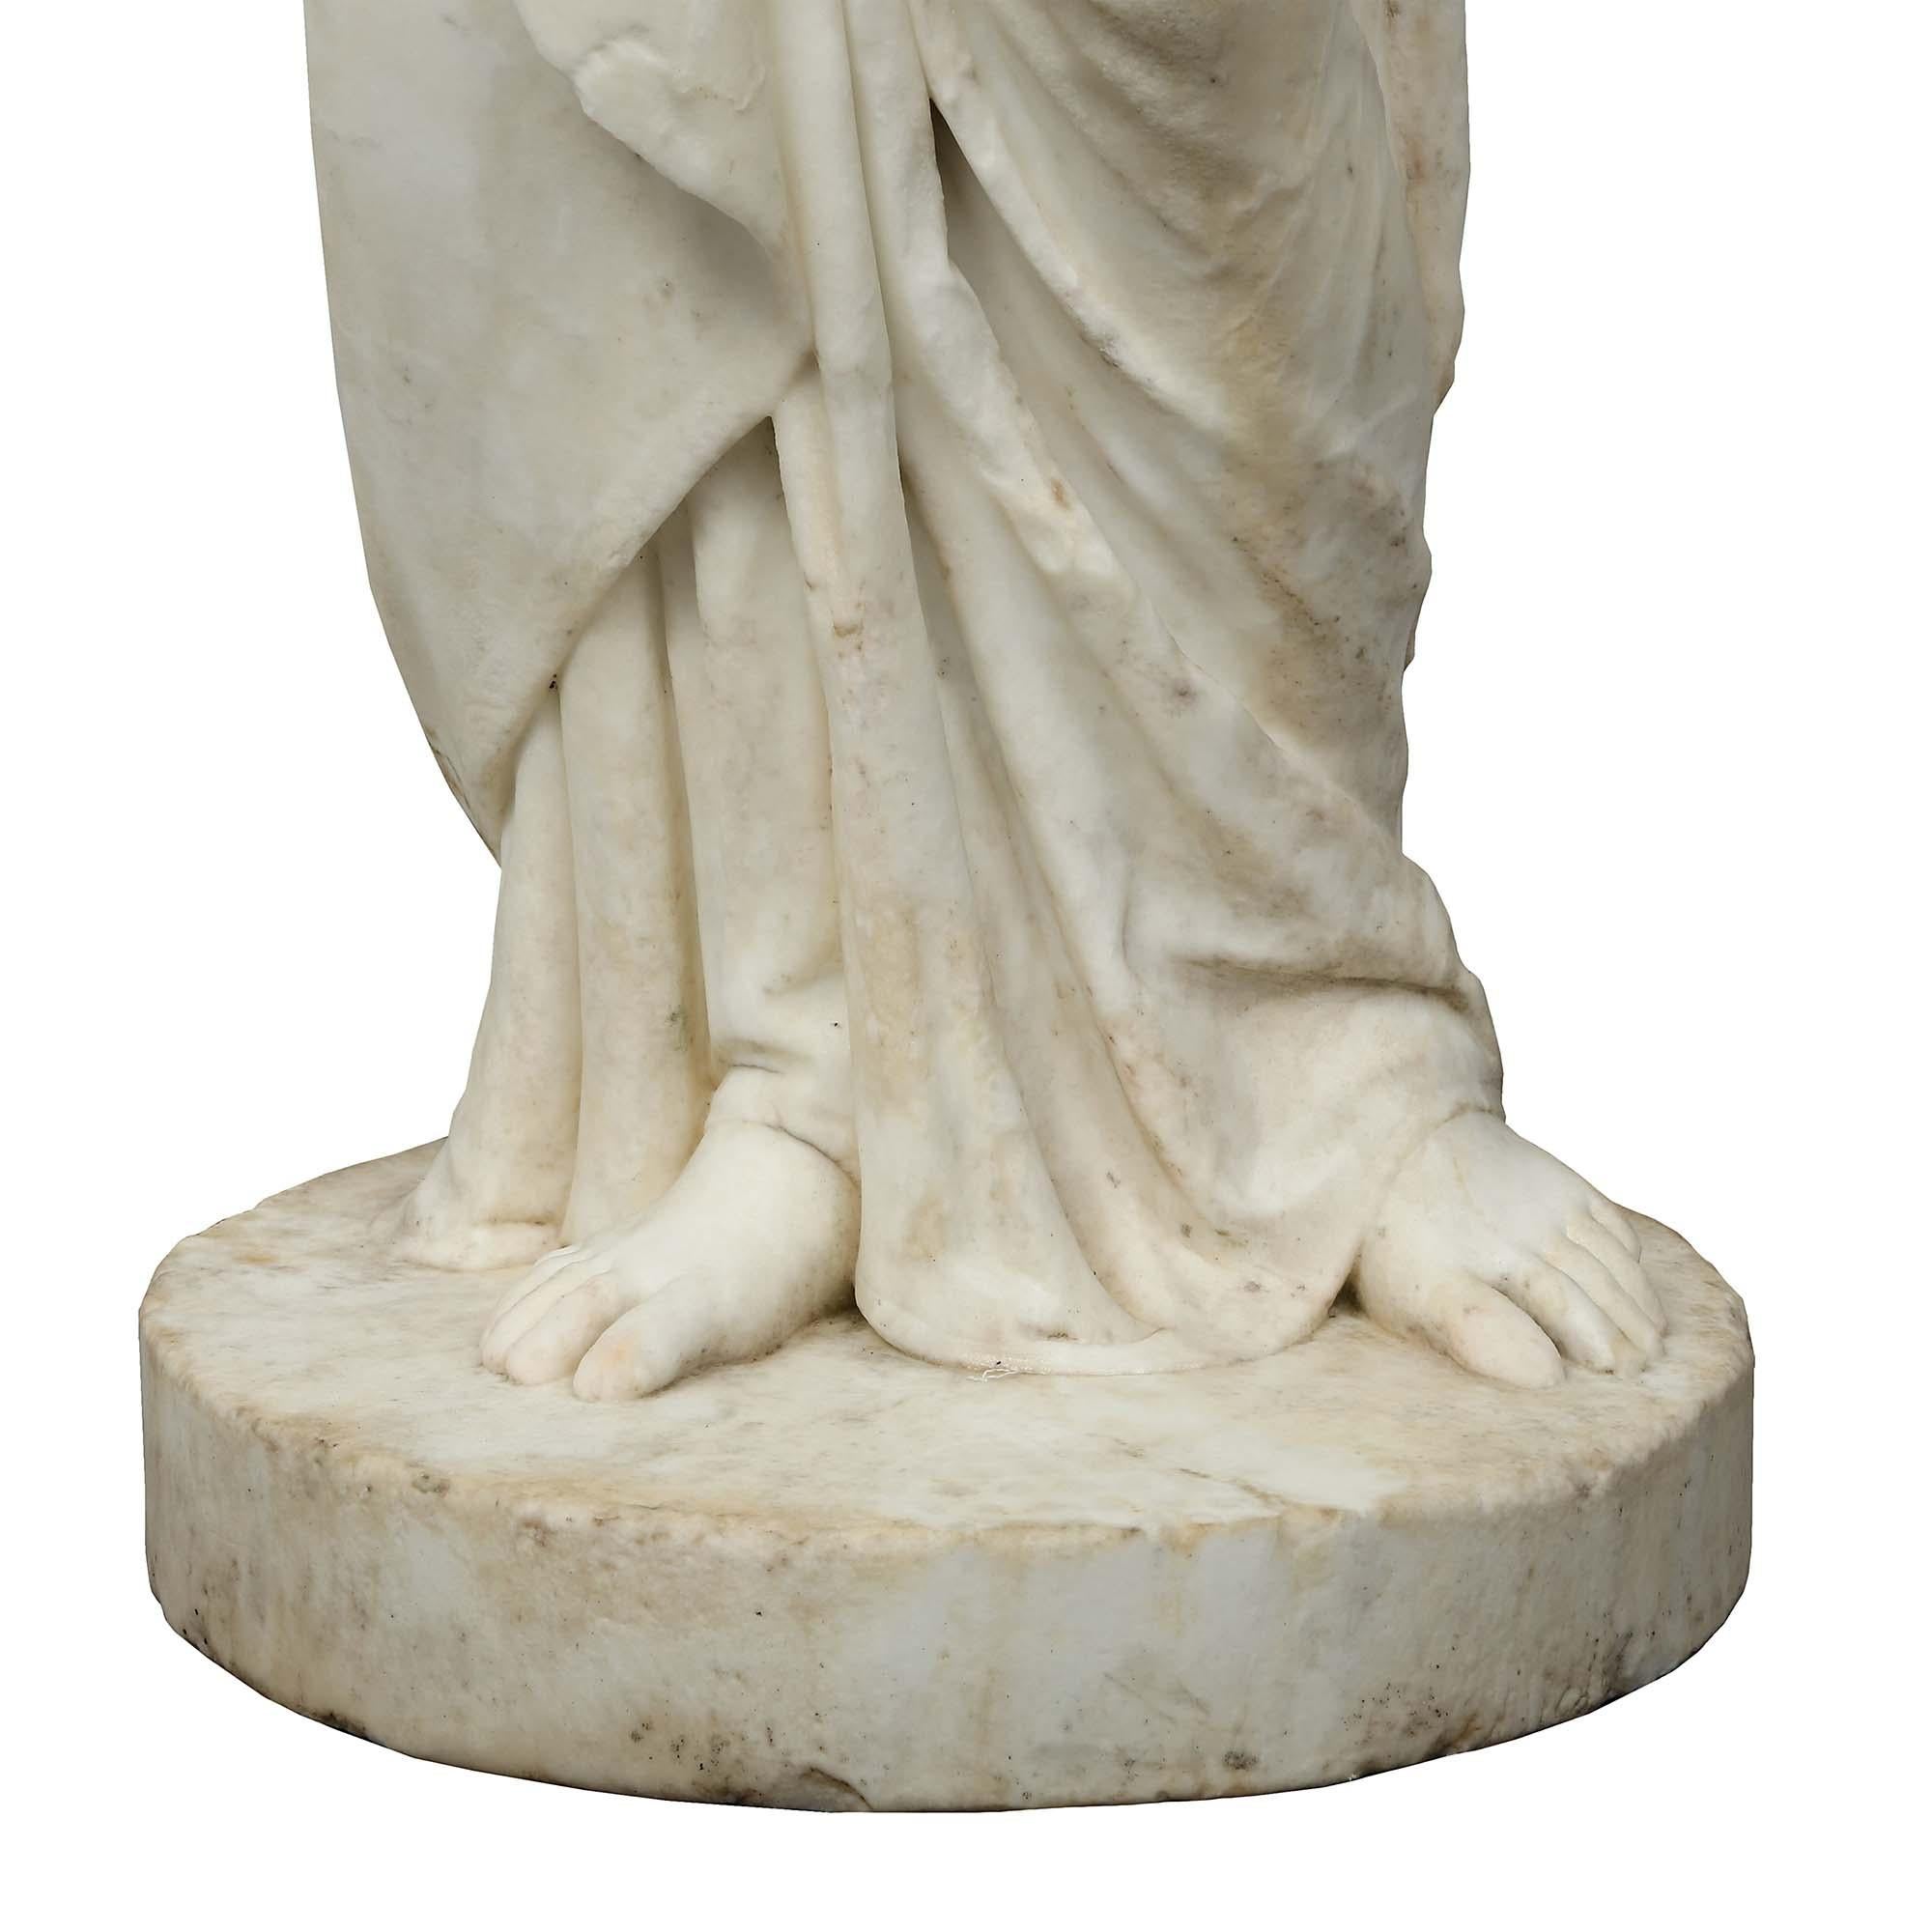 Italian Early 19th Century Solid White Carrara Marble Statue of a Young Maiden For Sale 4